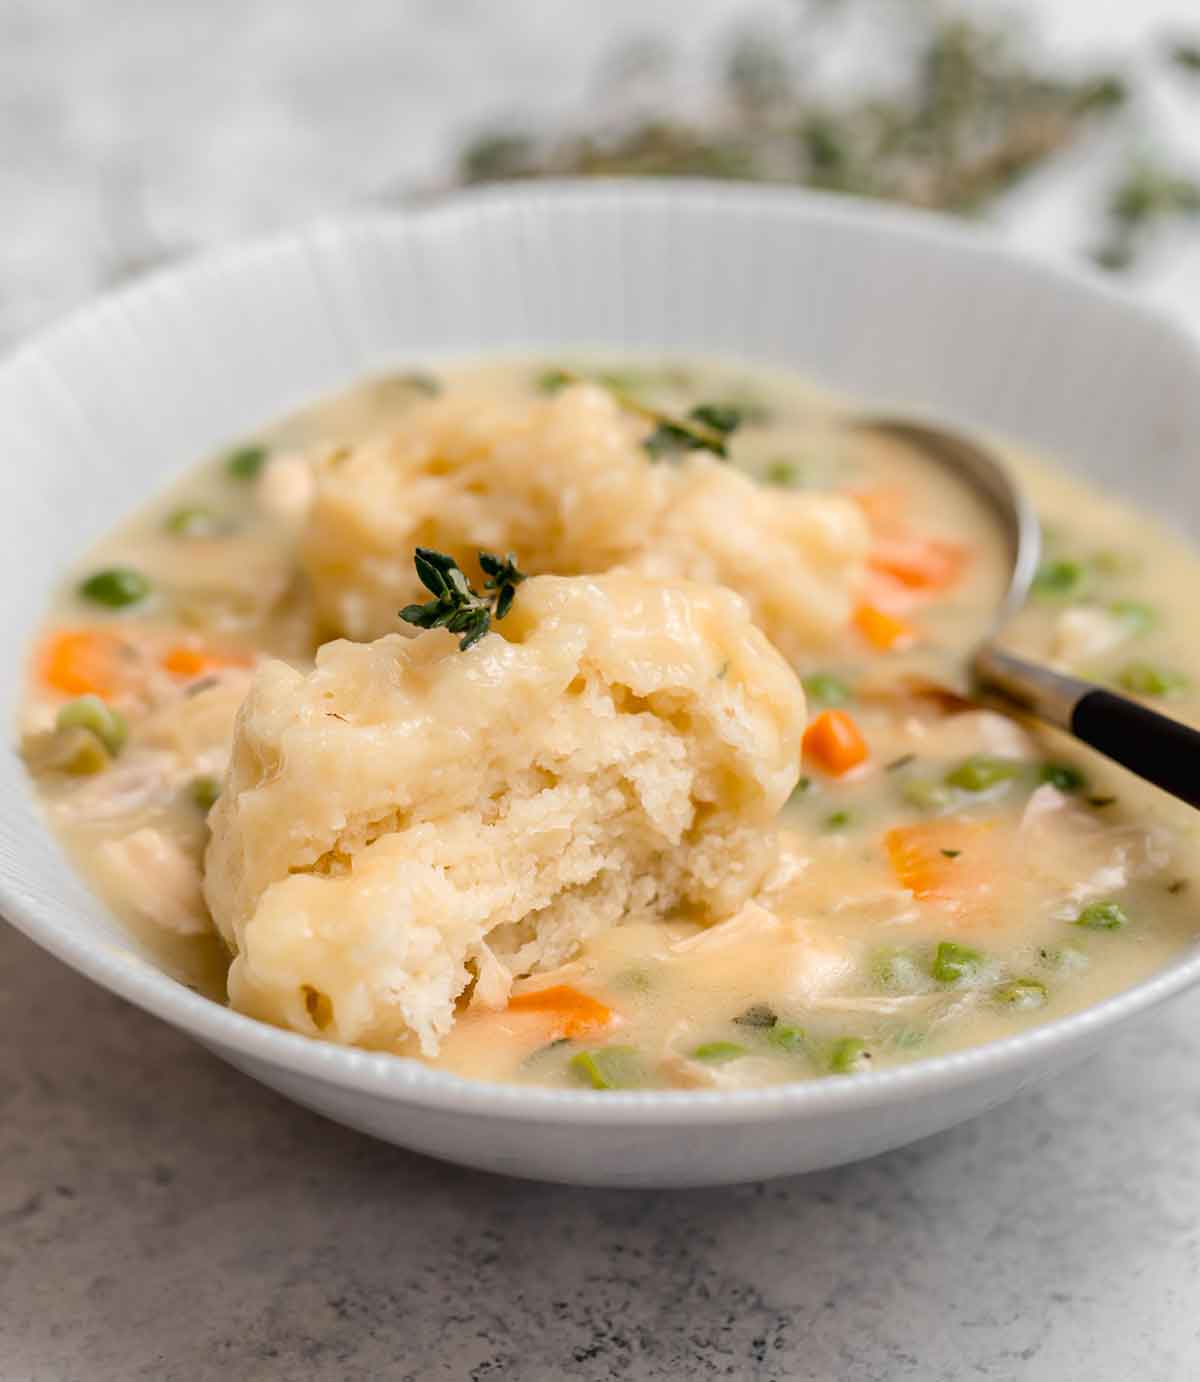 Chicken and dumplings in a white bowl with a spoon and dumpling being broken in half.